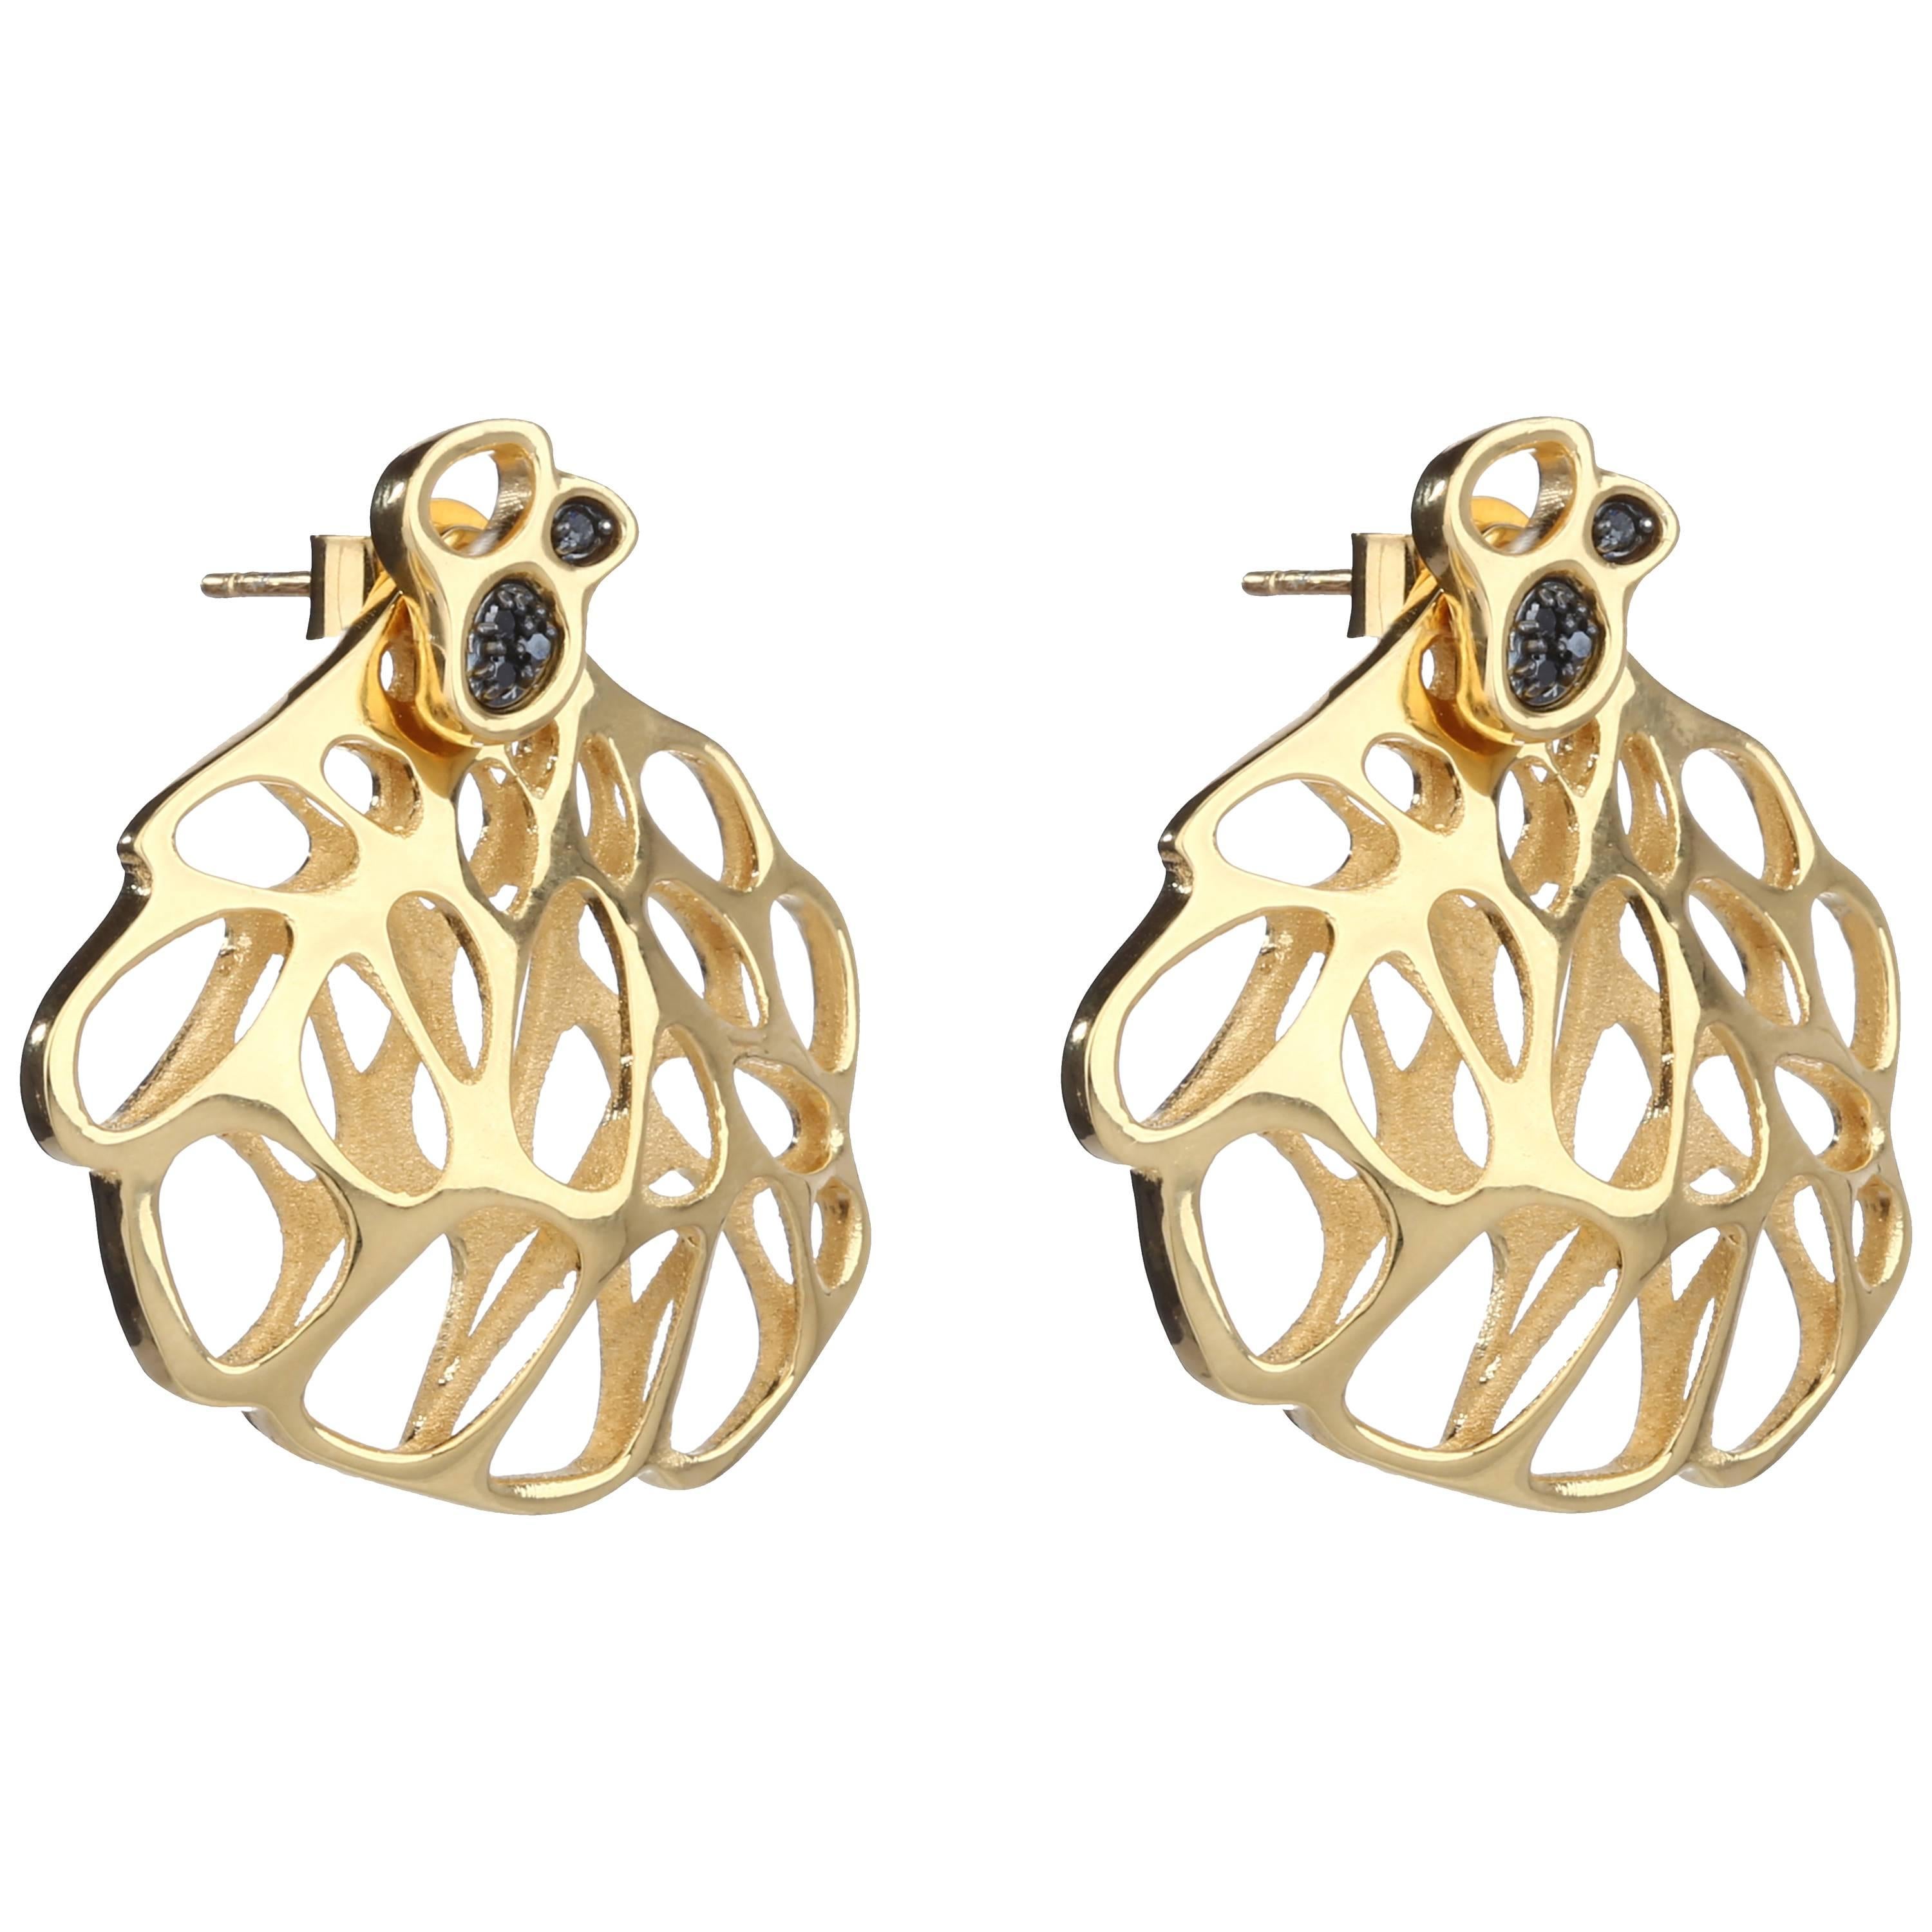 FLOWEN Sterling Silver Aoda Studs and EarJackets in 18k Gold and Black Diamonds  For Sale